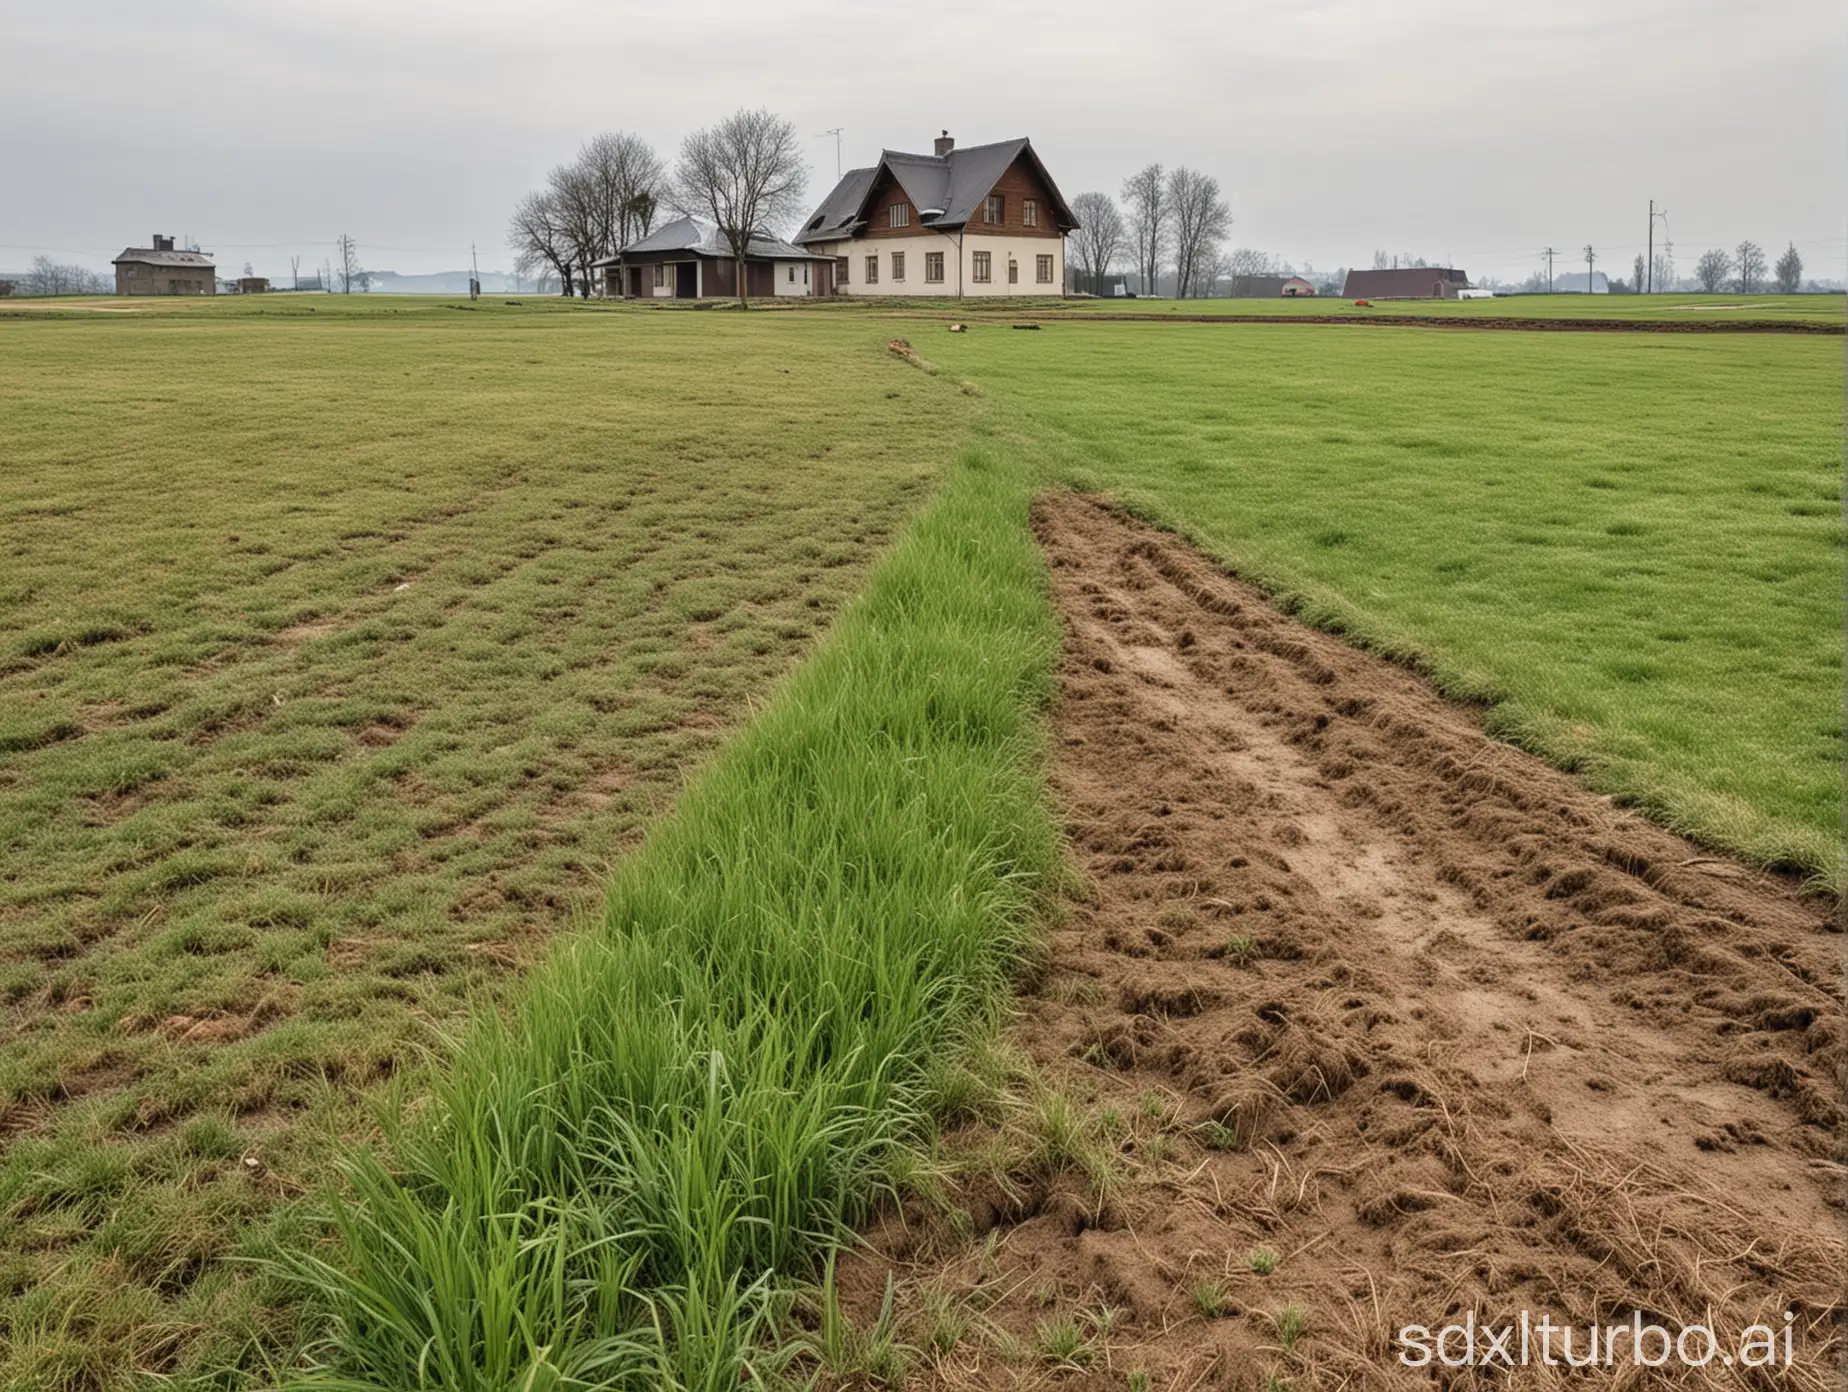 Rural-Landscape-Transition-from-Grass-to-Plowed-Land-Leading-to-Country-House